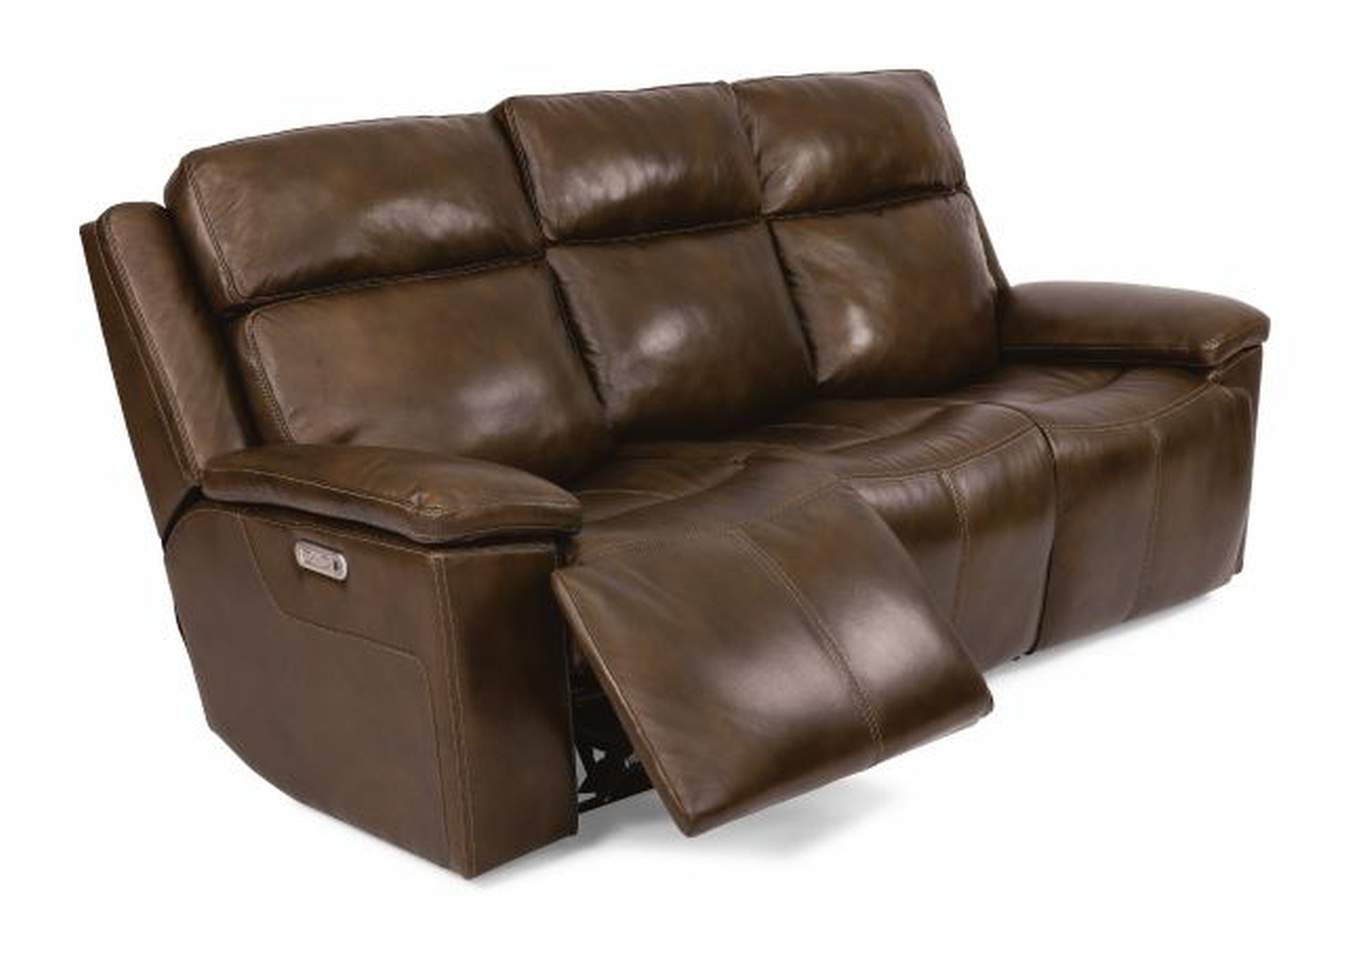 Chance Brown Power Reclining Sofa with Power Headrests,Flexsteel